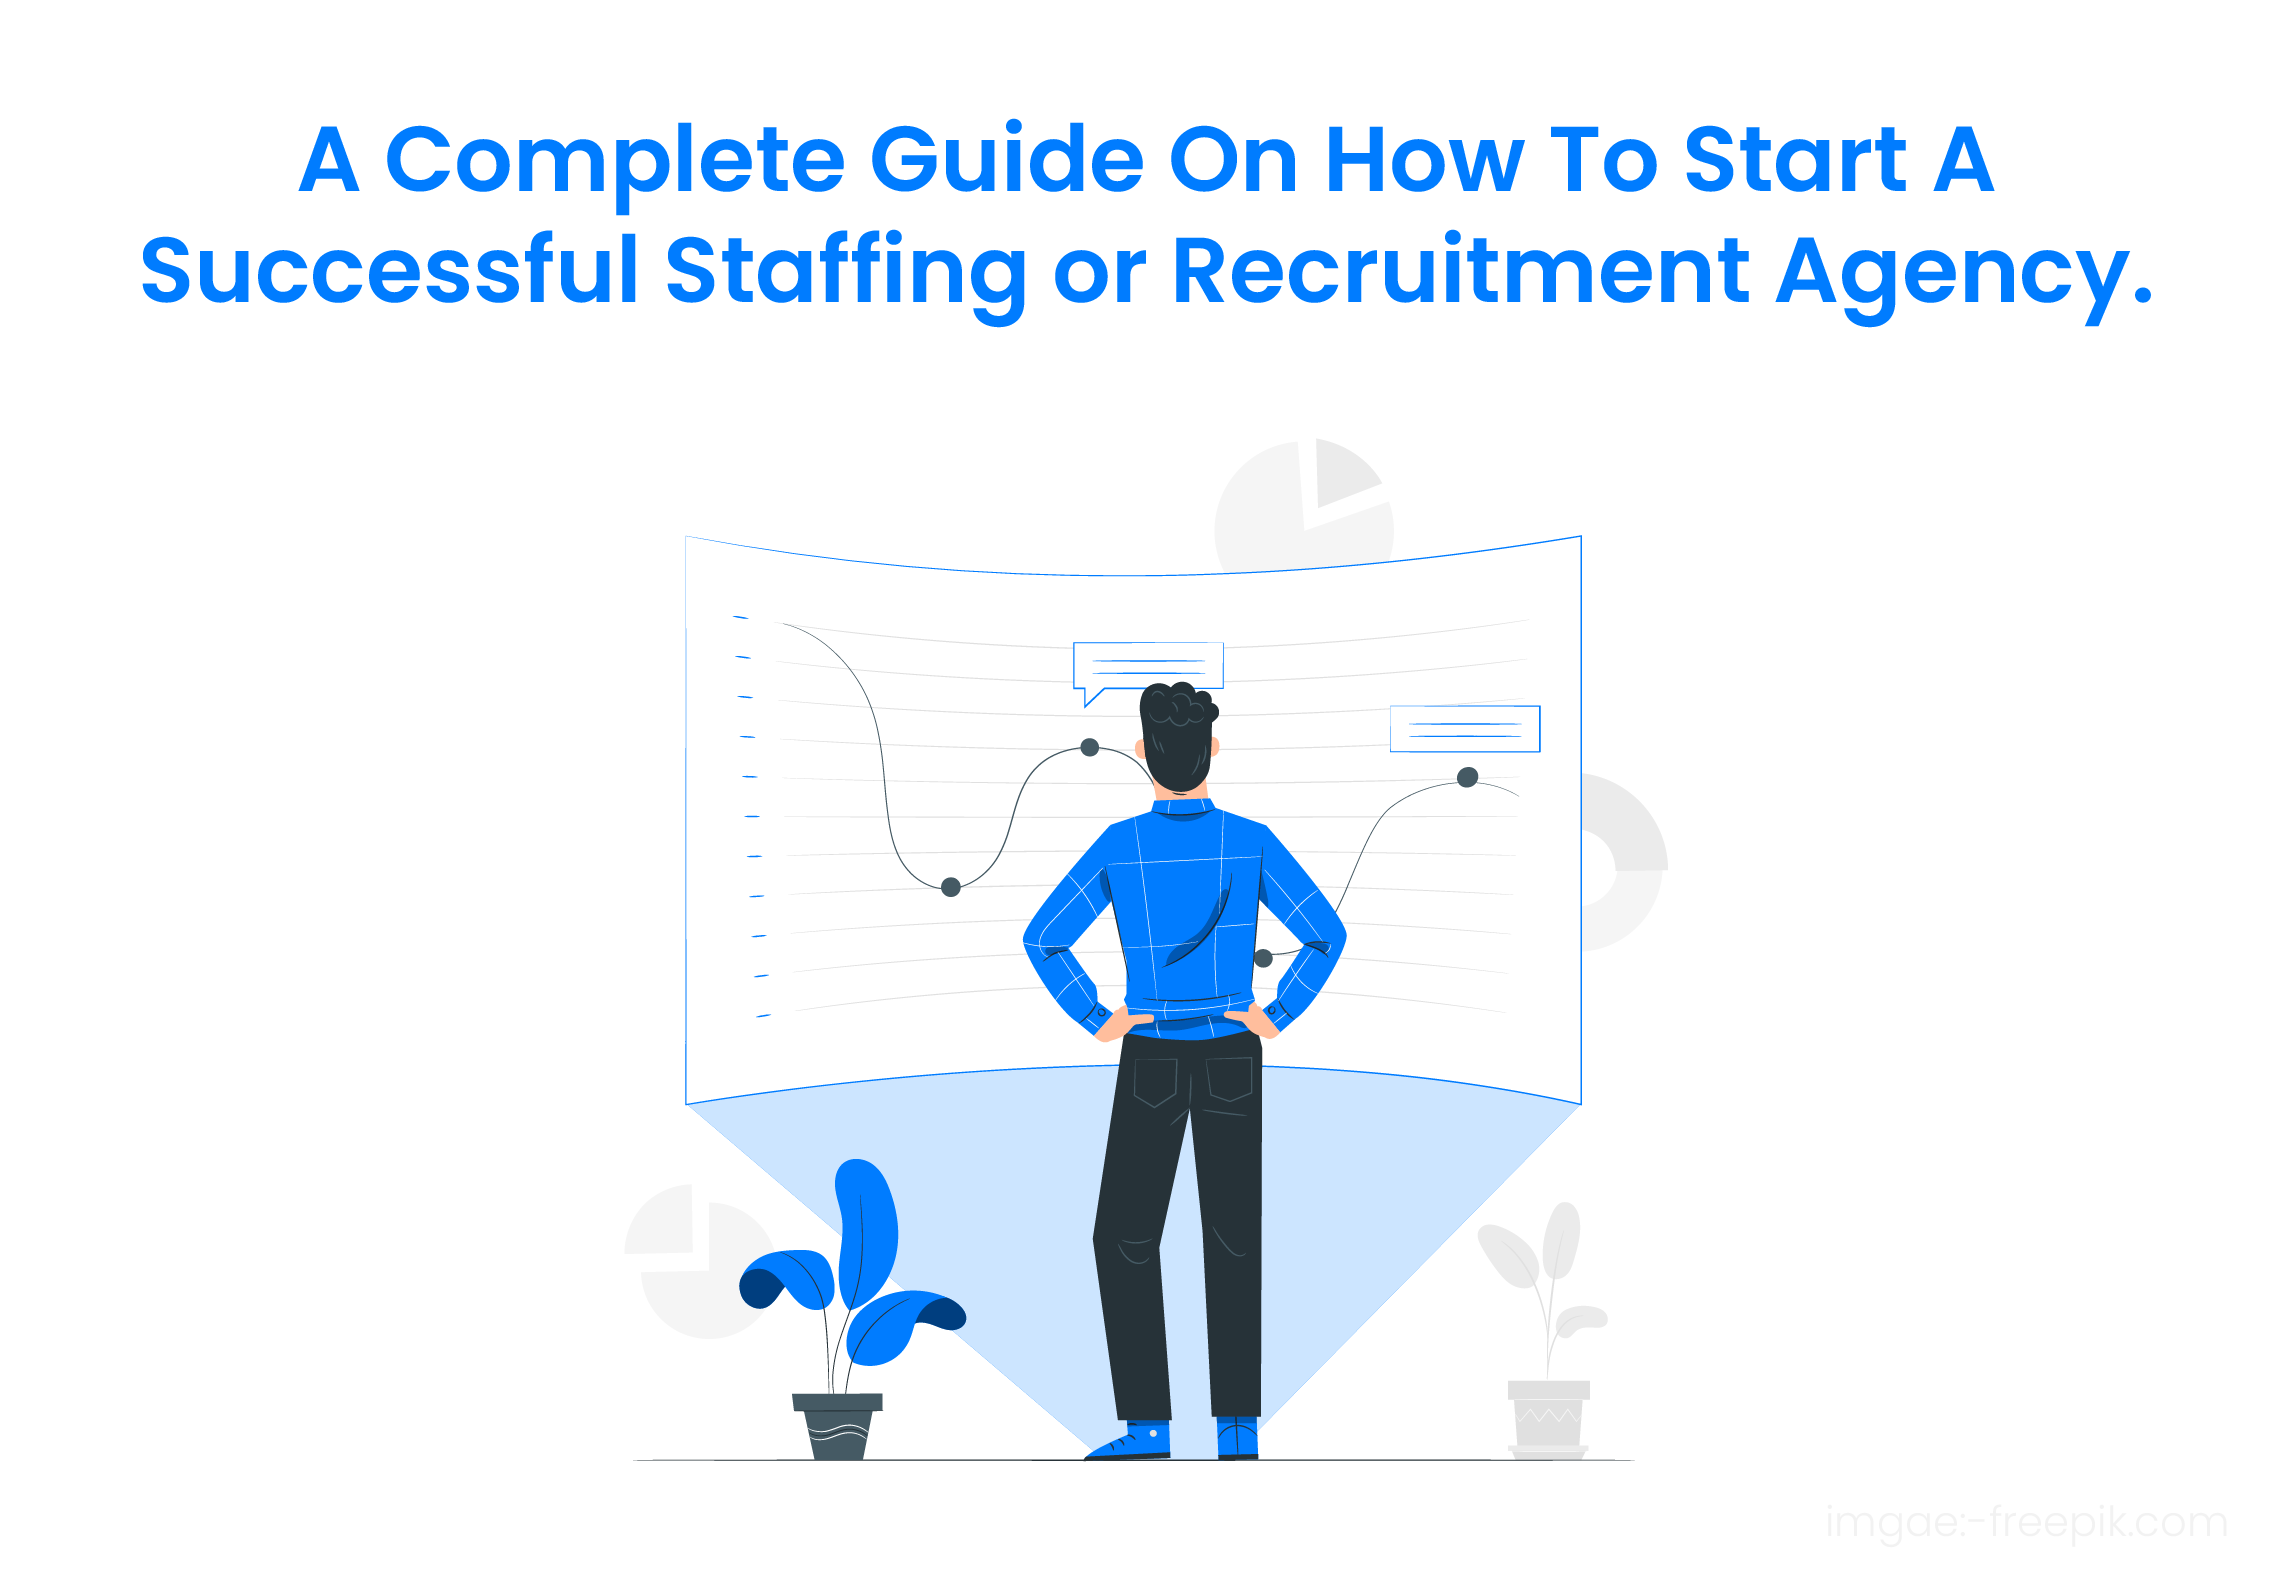 A Complete Guide On How To Start A Successful Staffing or Recruitment Agency